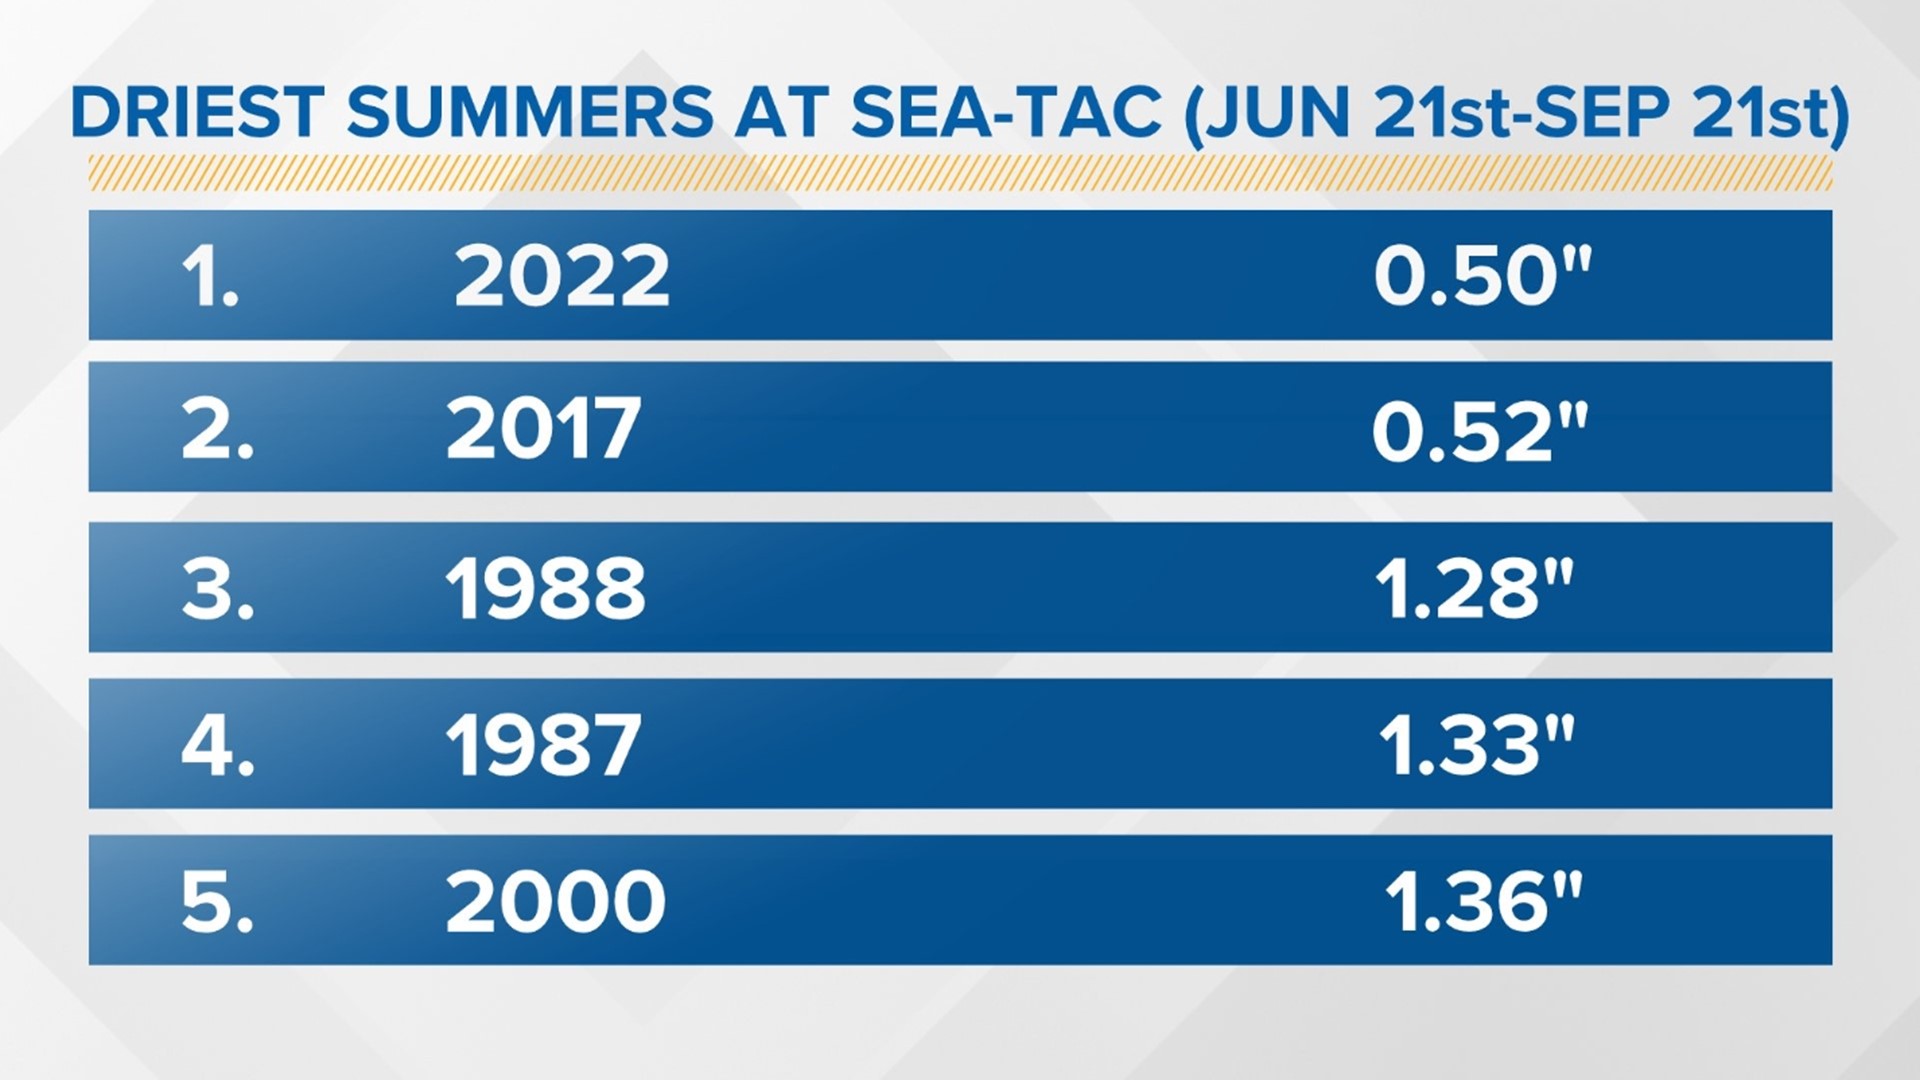 This summer was the driest on record in Seattle and saw the most 90-degree days in a calendar year.